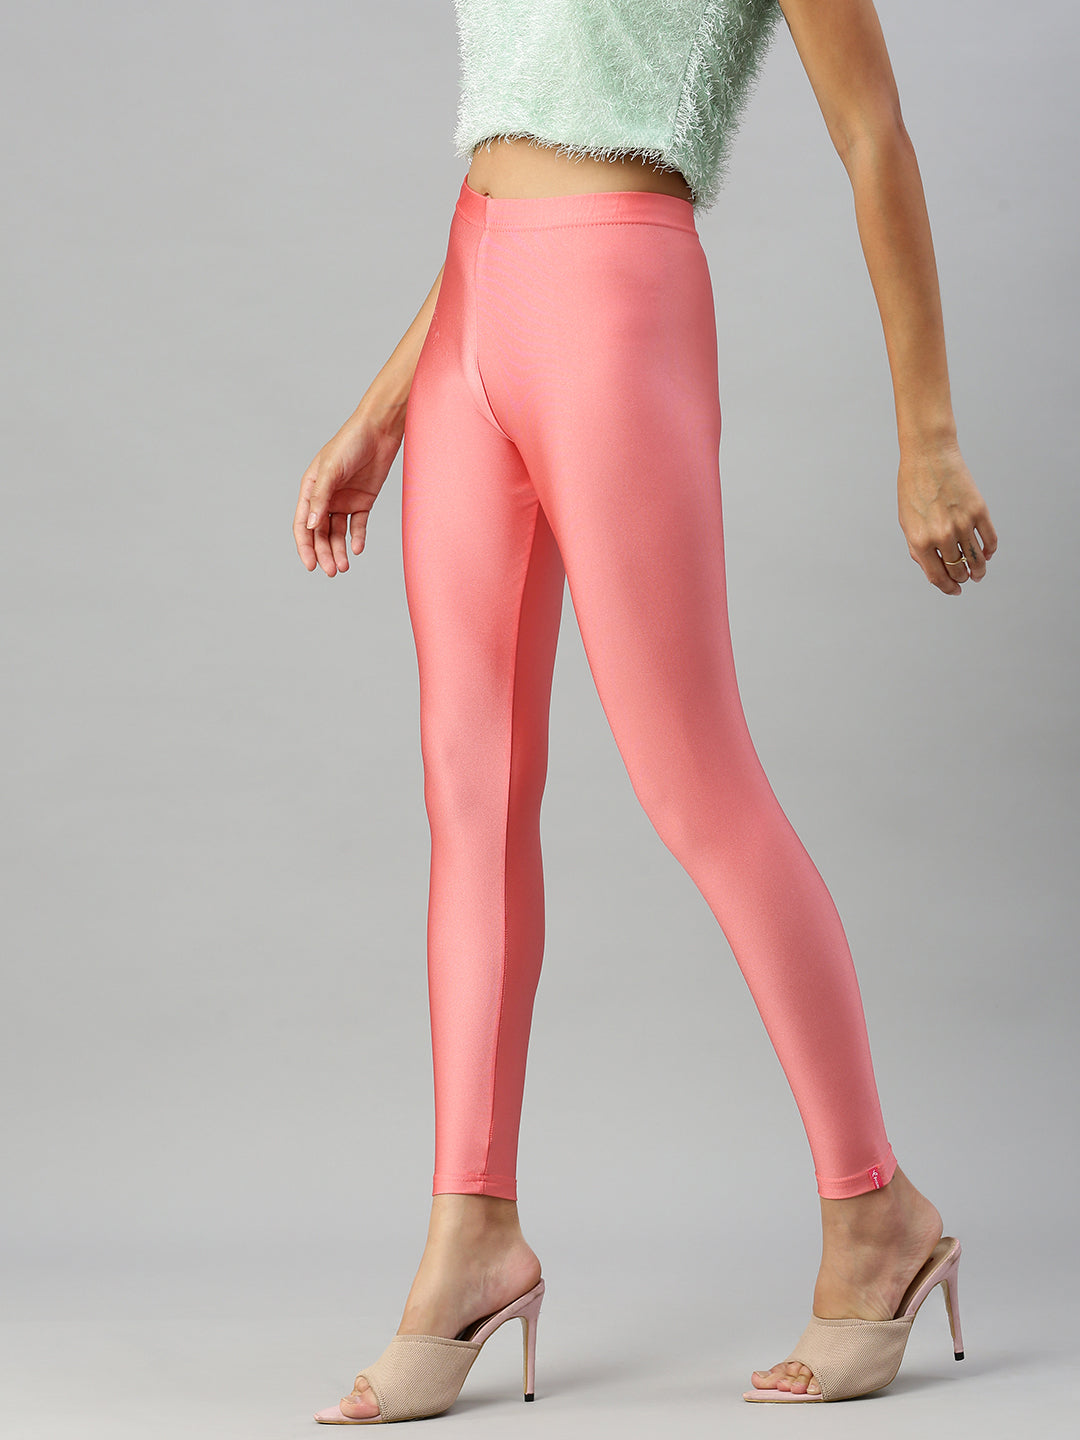 Prisma Shimmer Leggings in Peach for a Chic Look